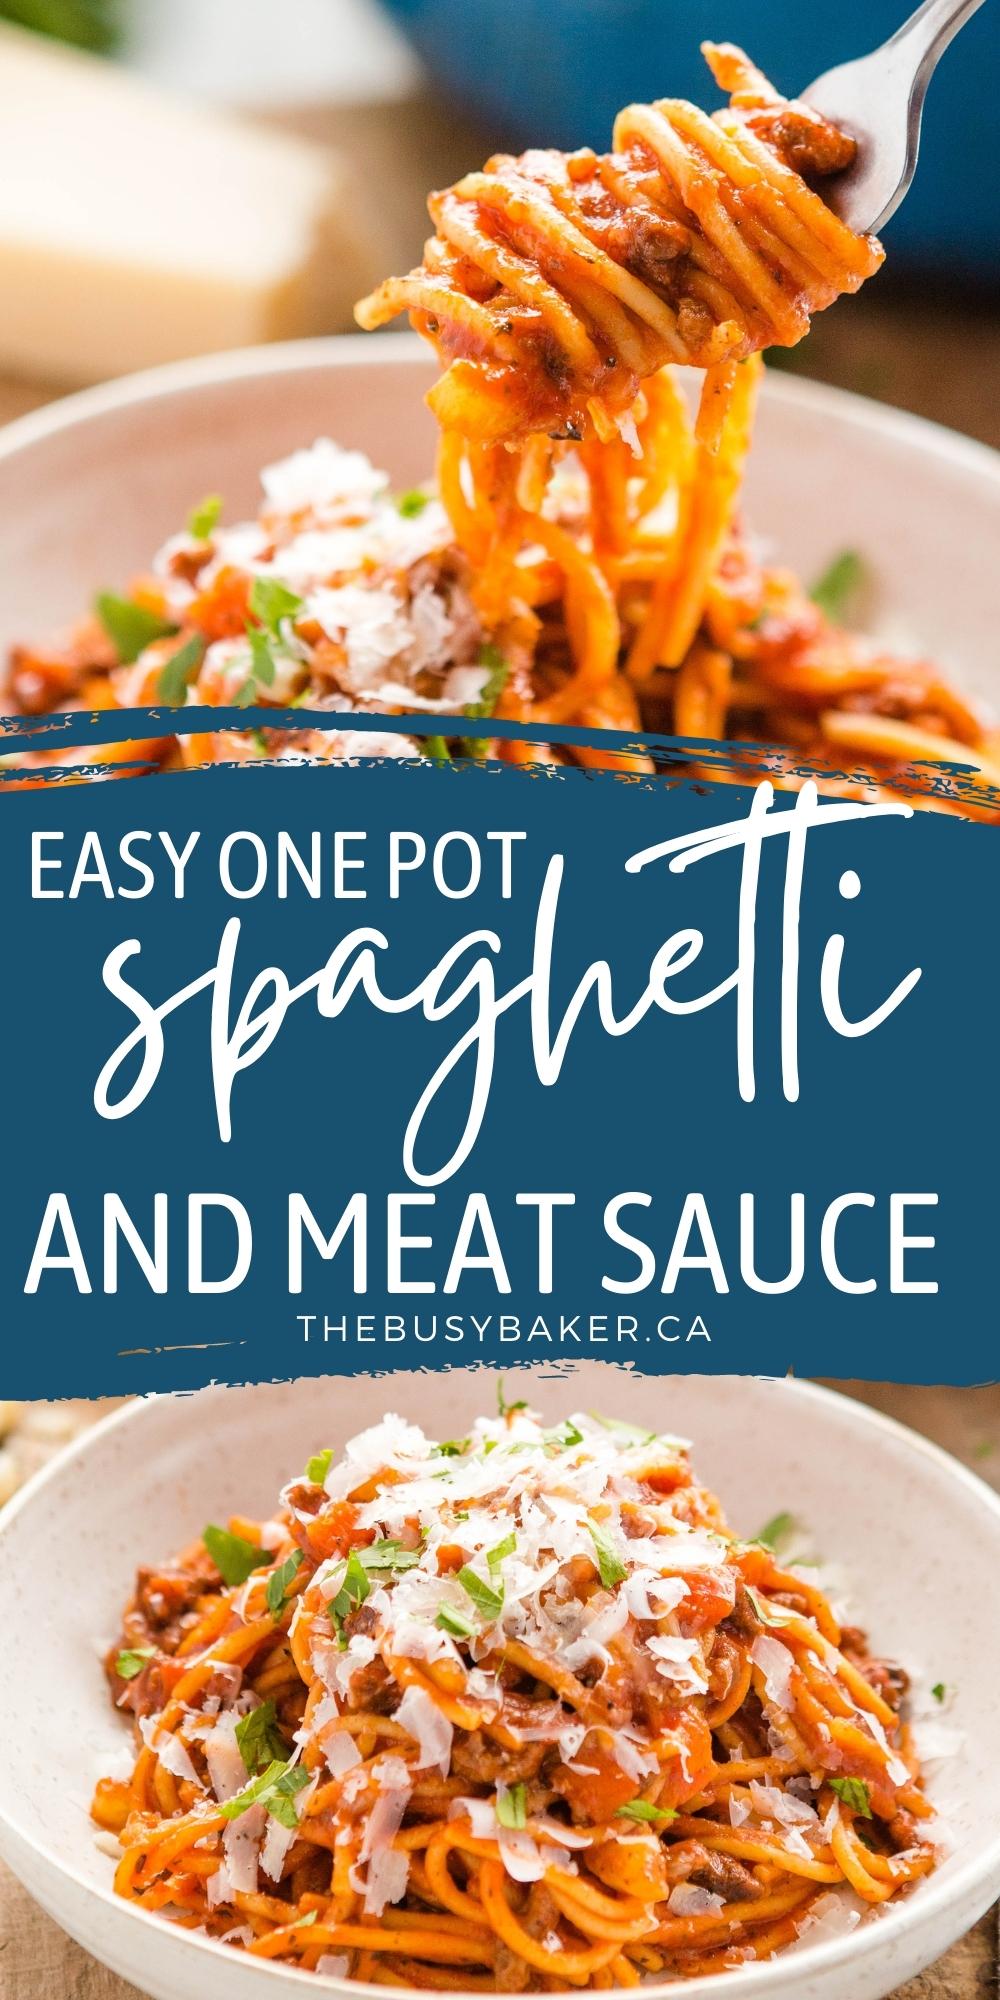 This One Pot Spaghetti and Meat Sauce is a family favourite weeknight meal! Simple pasta cooked in a beefy tomato sauce, kid-friendly, easy and delicious! Recipe from thebusybaker.ca! #onepotspaghetti #easymeal #dinner #familymeal #weeknightmeal #spaghettiandmeatsauce via @busybakerblog